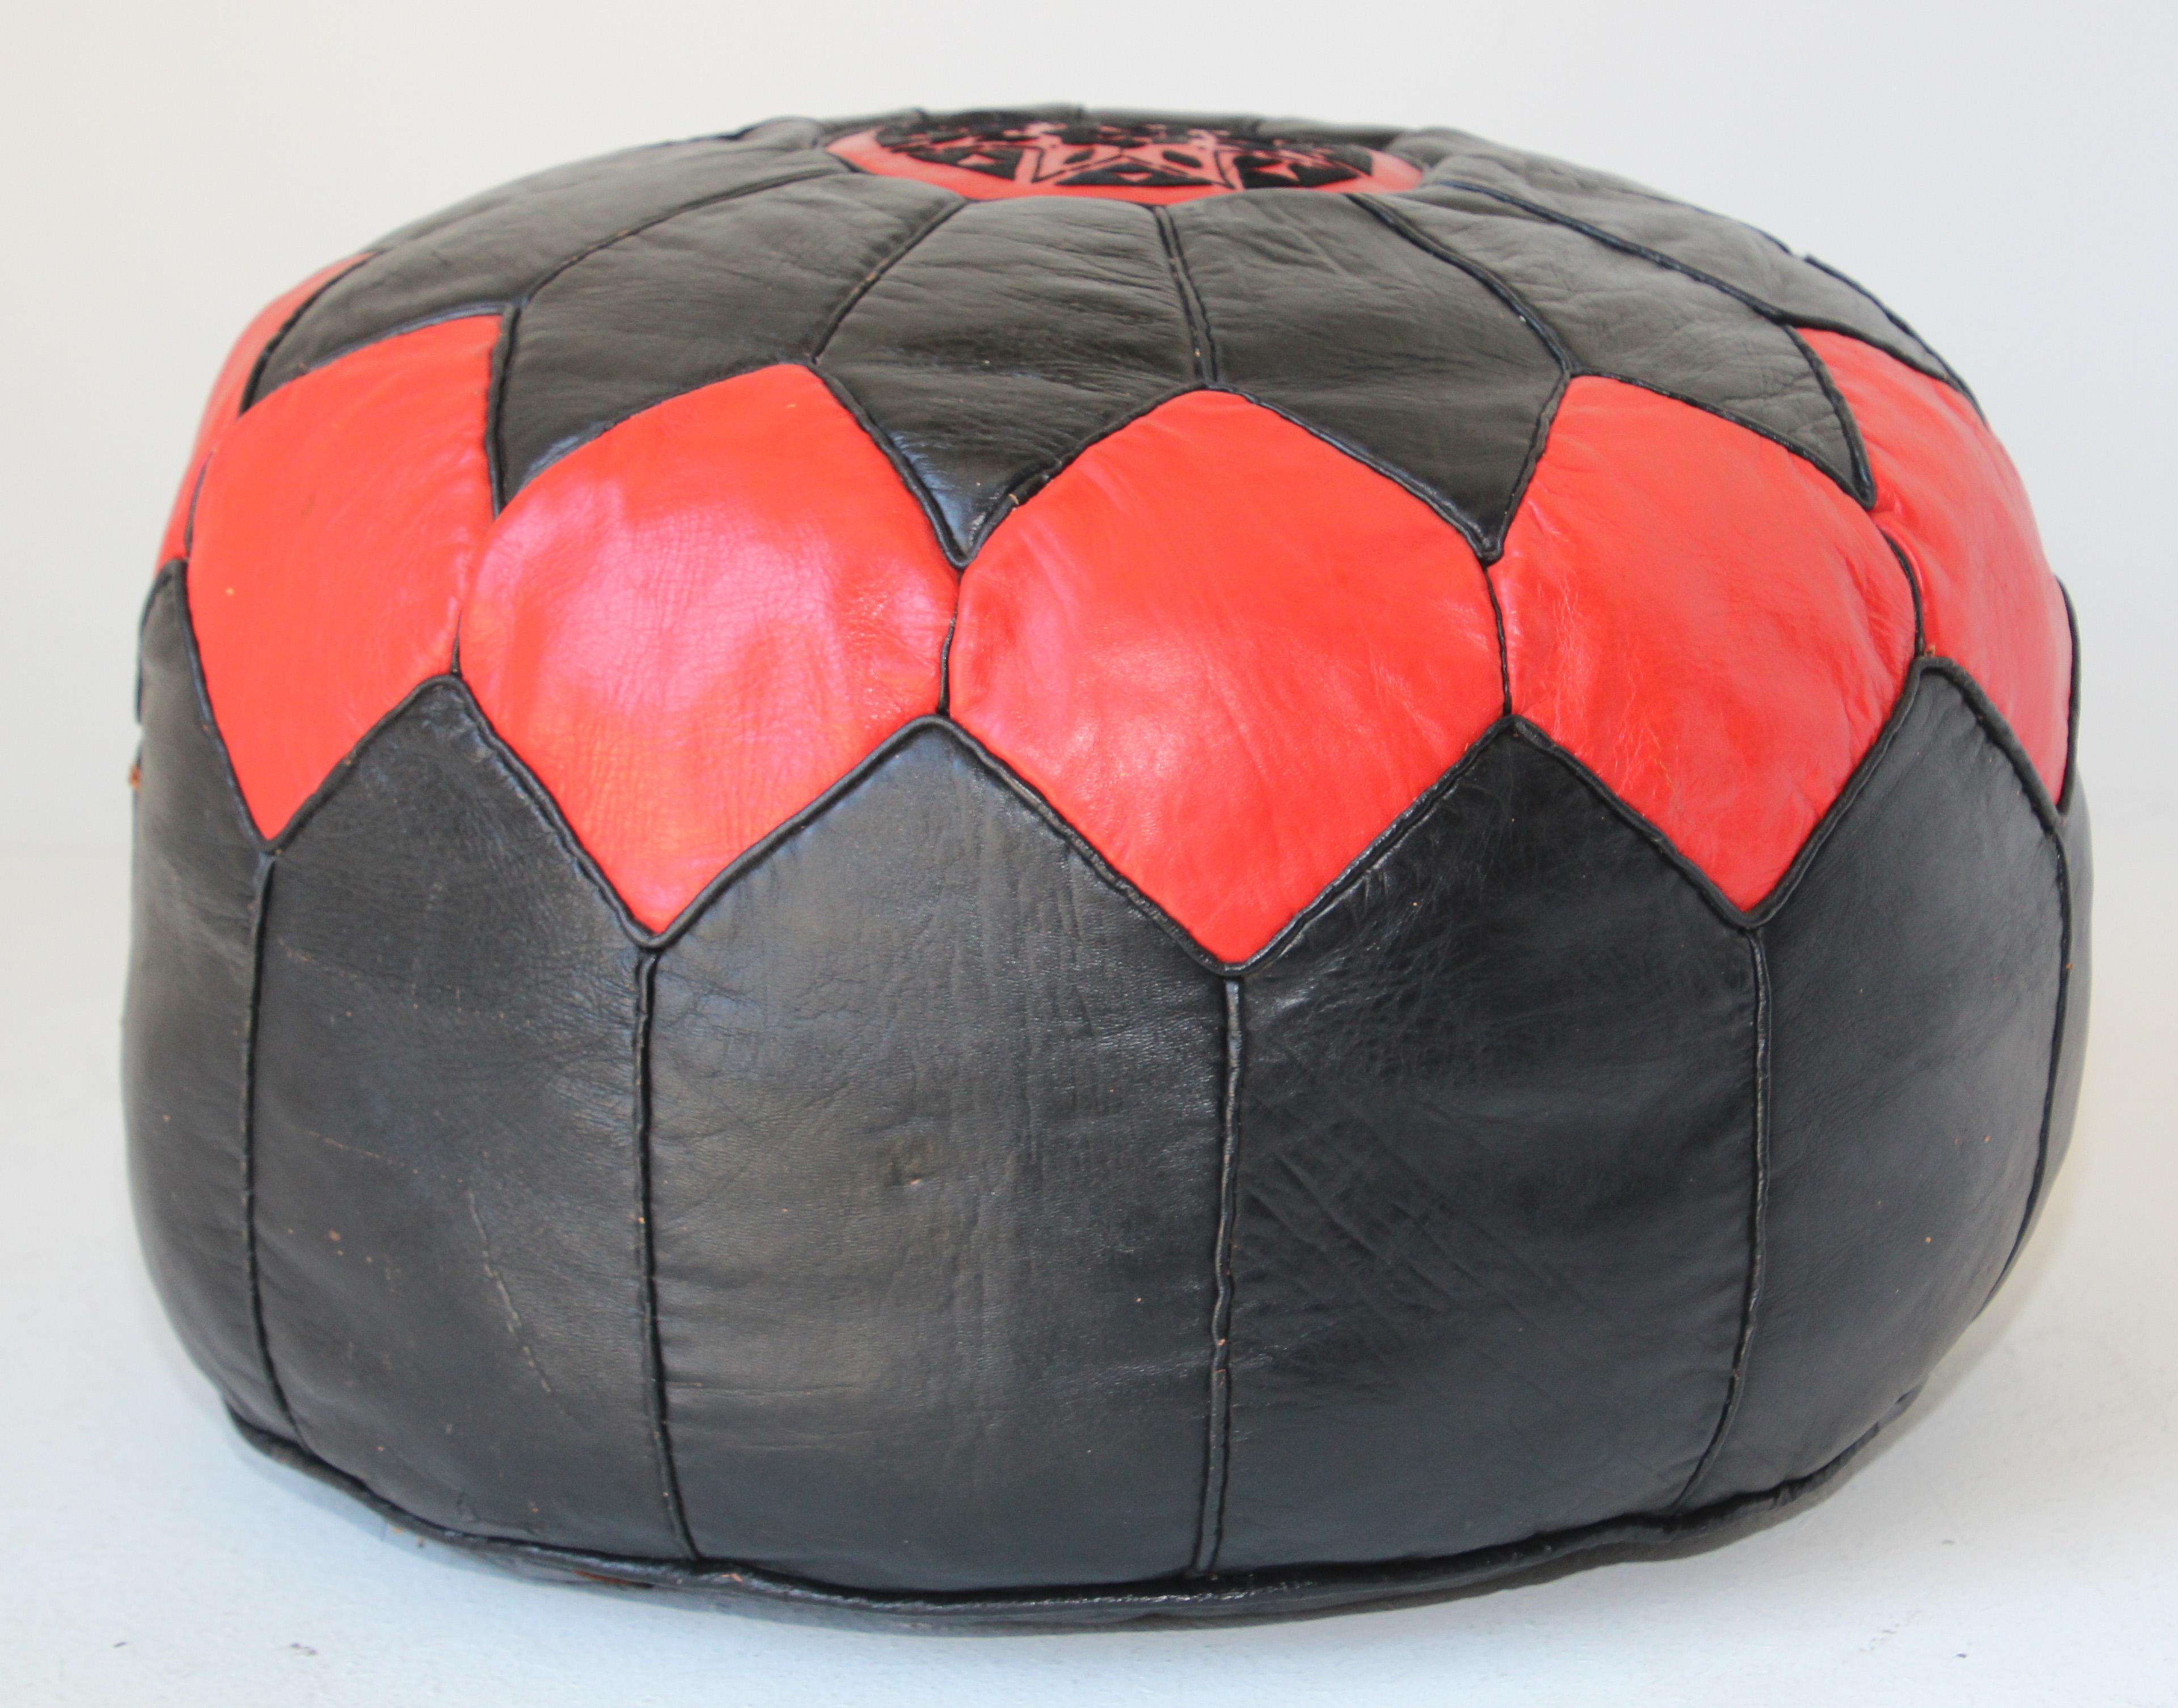 Moorish Vintage Moroccan Leather Pouf Hand-Tooled in Marrakesh Red and Black For Sale